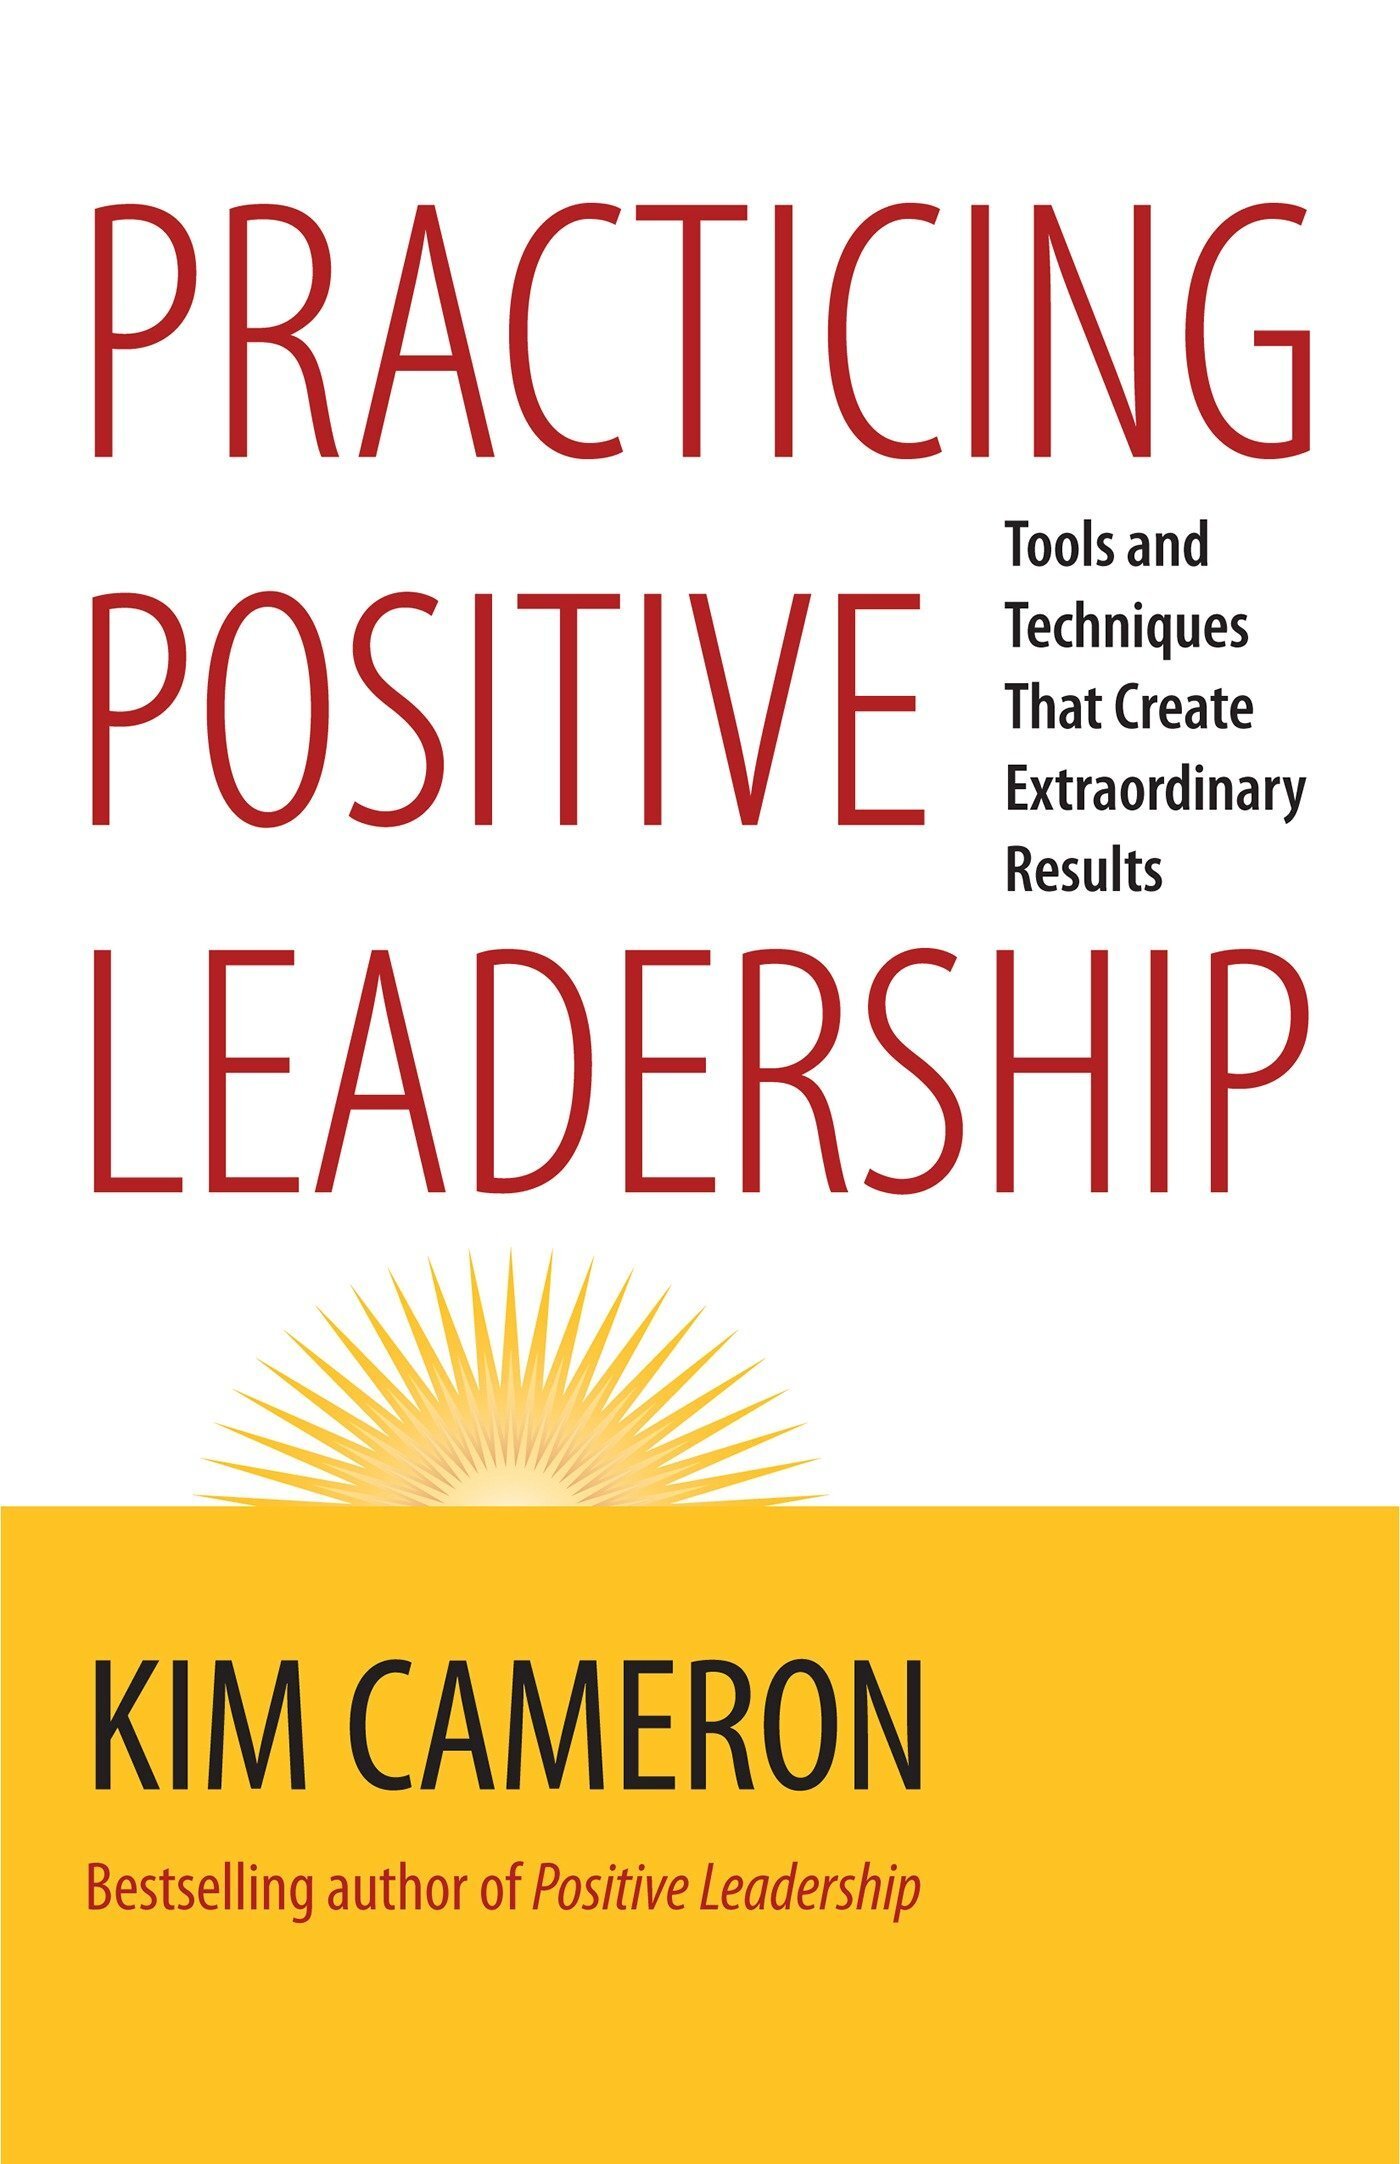 Practicing Positive Leadership: Tools and Techniques That Create Extraordinary Results - Kim Cameron